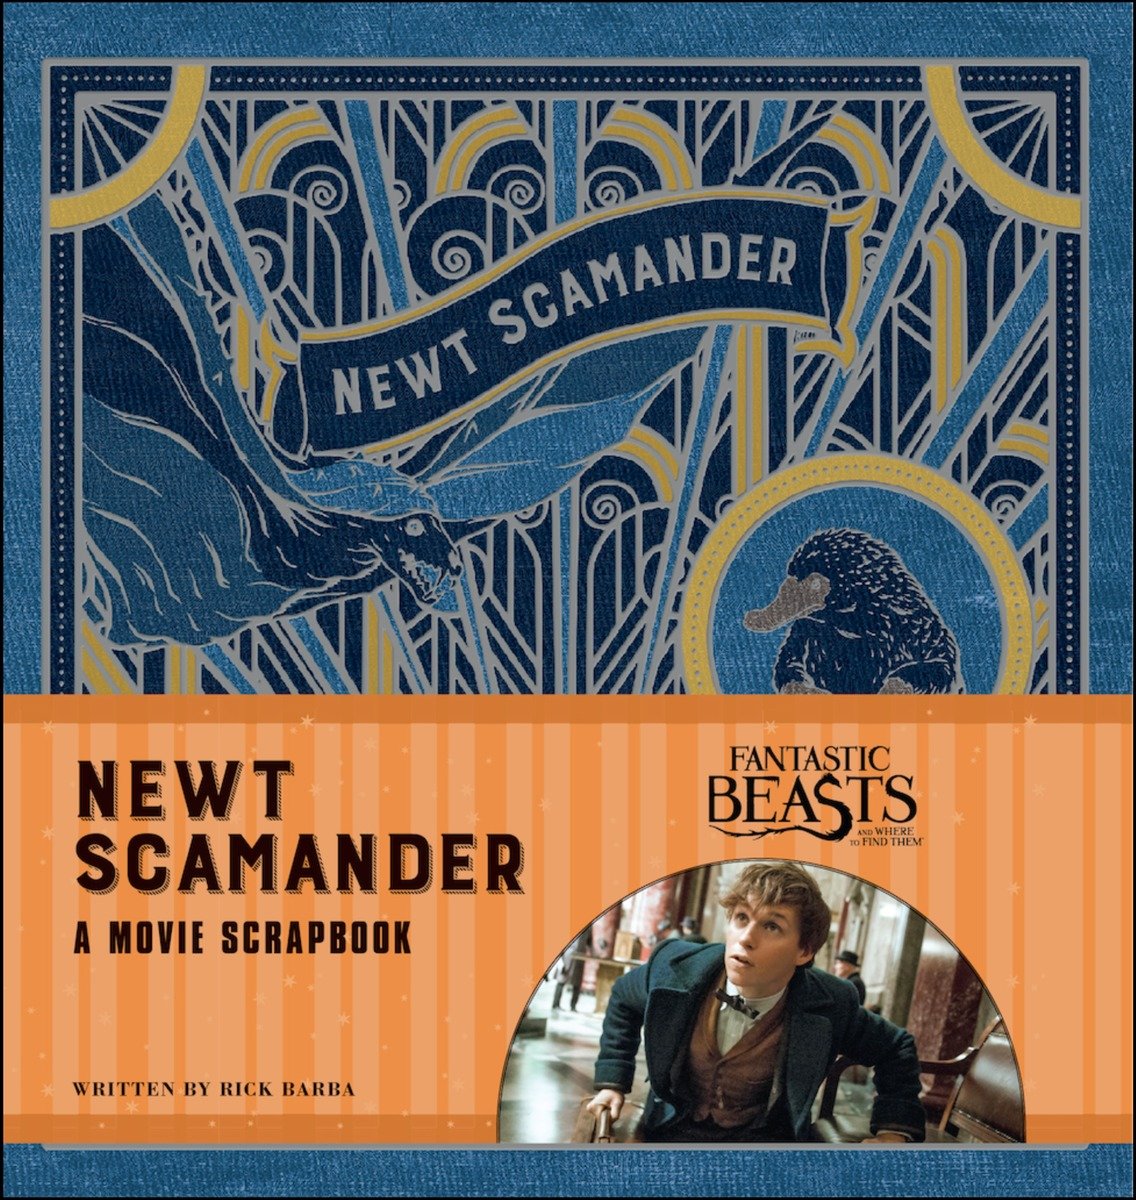 Fantastic Beasts And Where To Find Them: Newt Scamander: A Movie Scrapbook (Hardcover Book)